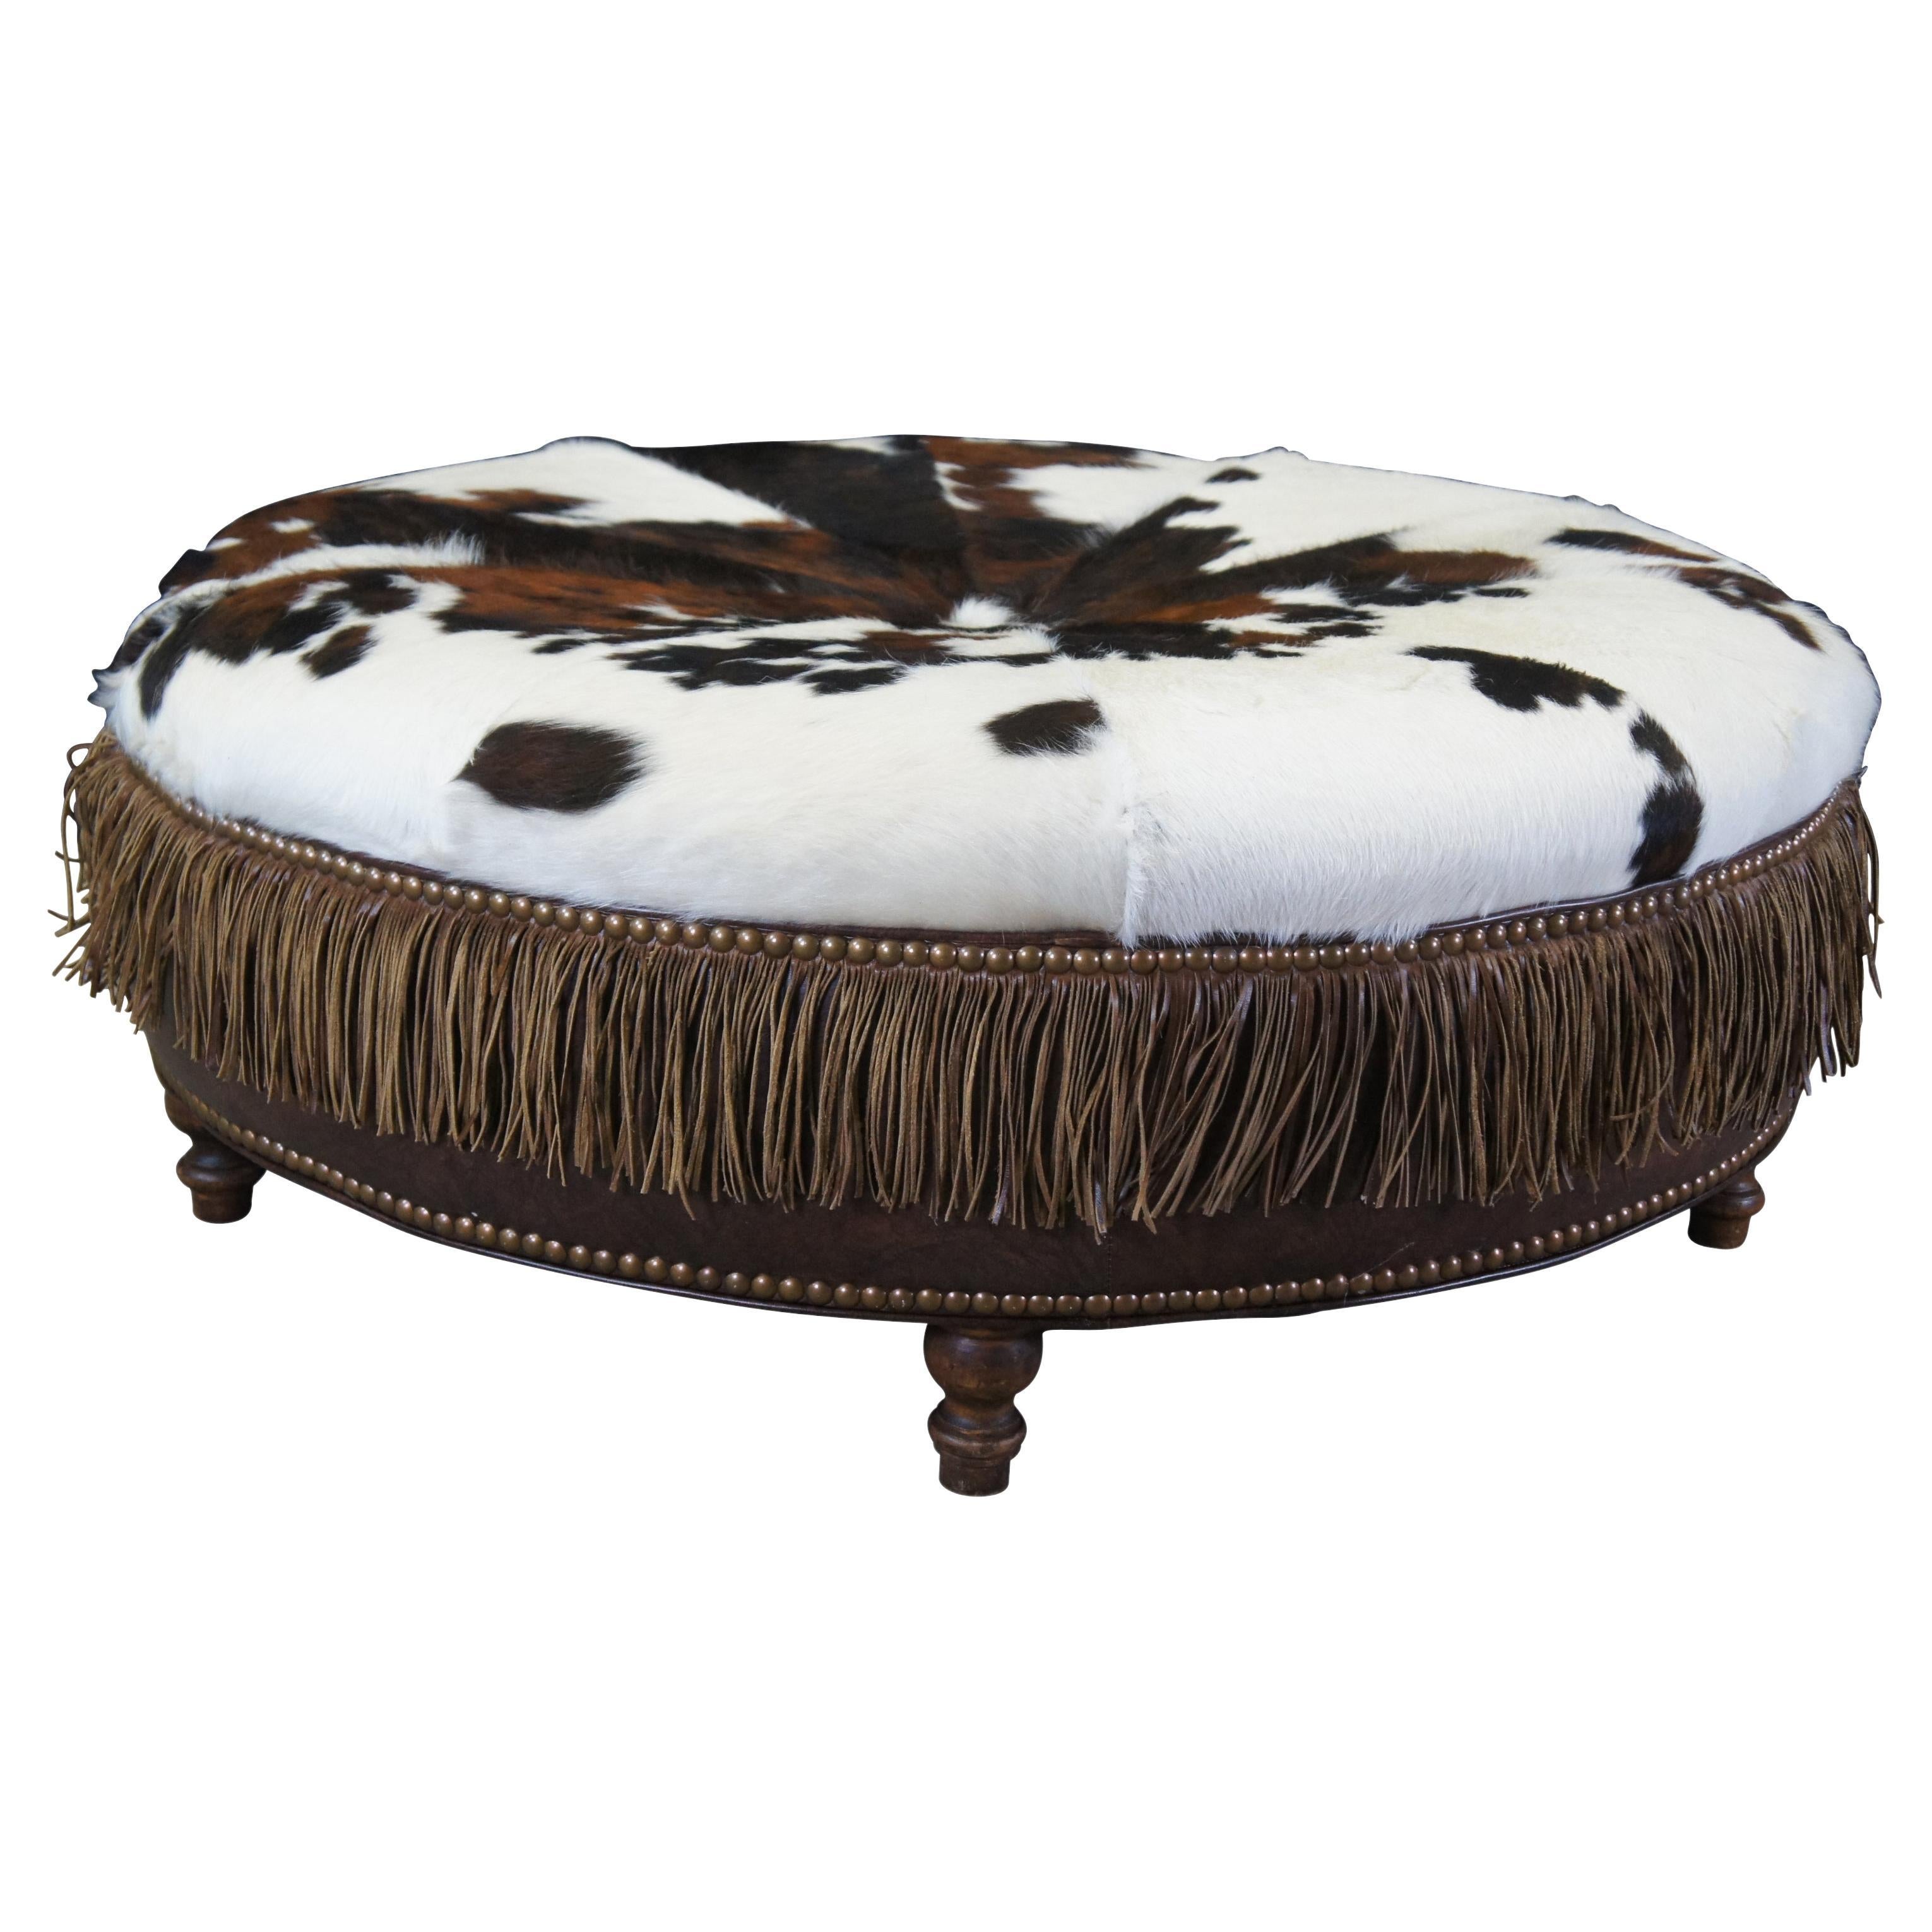 Vintage Round Leather Cowhide Fringed Ottoman Southwestern Brown & White